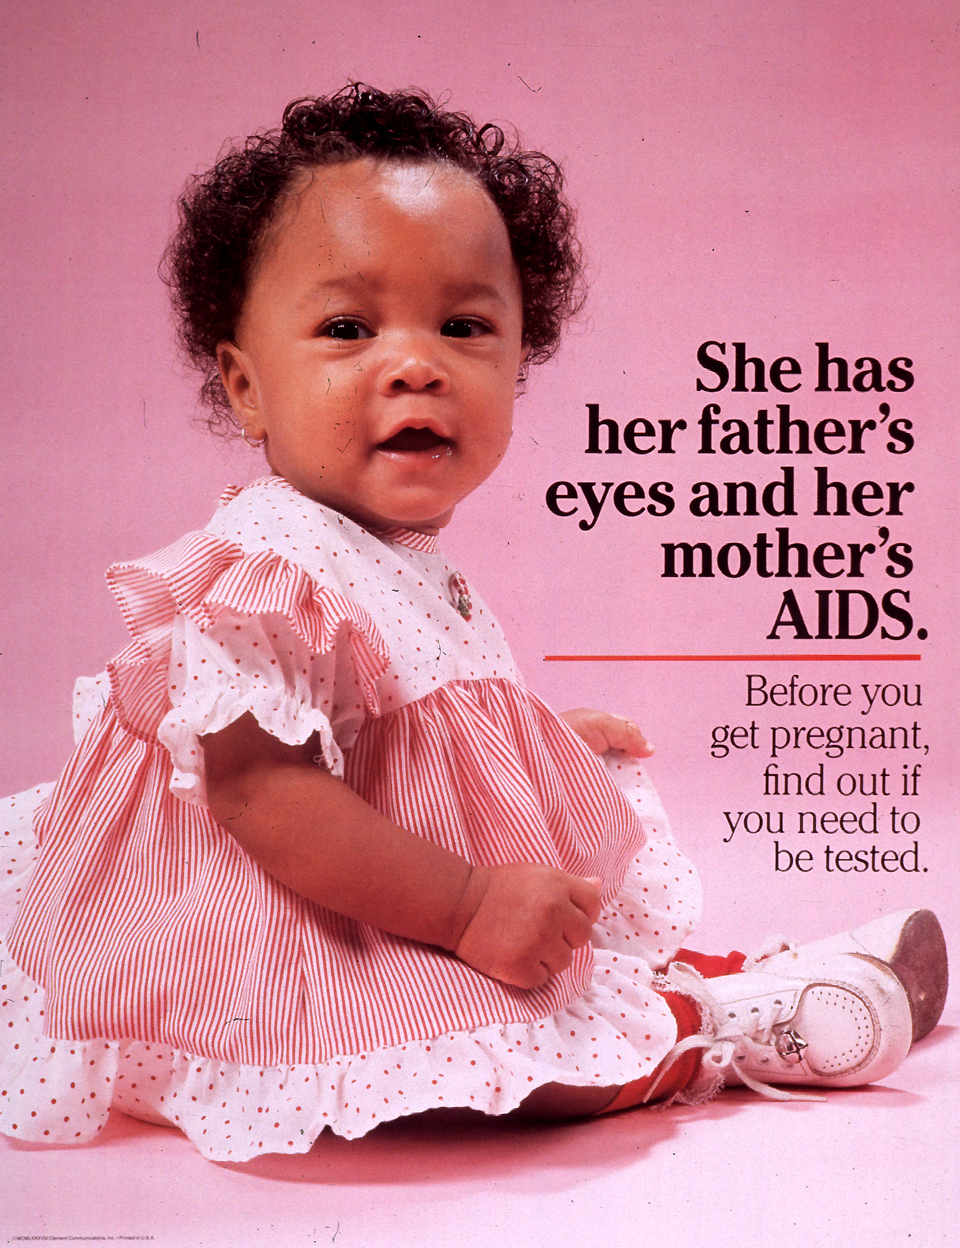 Poster is a reproduction of a color photo of a baby girl, sitting up and wearing a red striped dress. Title She Has Her Father's Eyes and Her Mother's AIDS on center right side of poster. Caption below title.